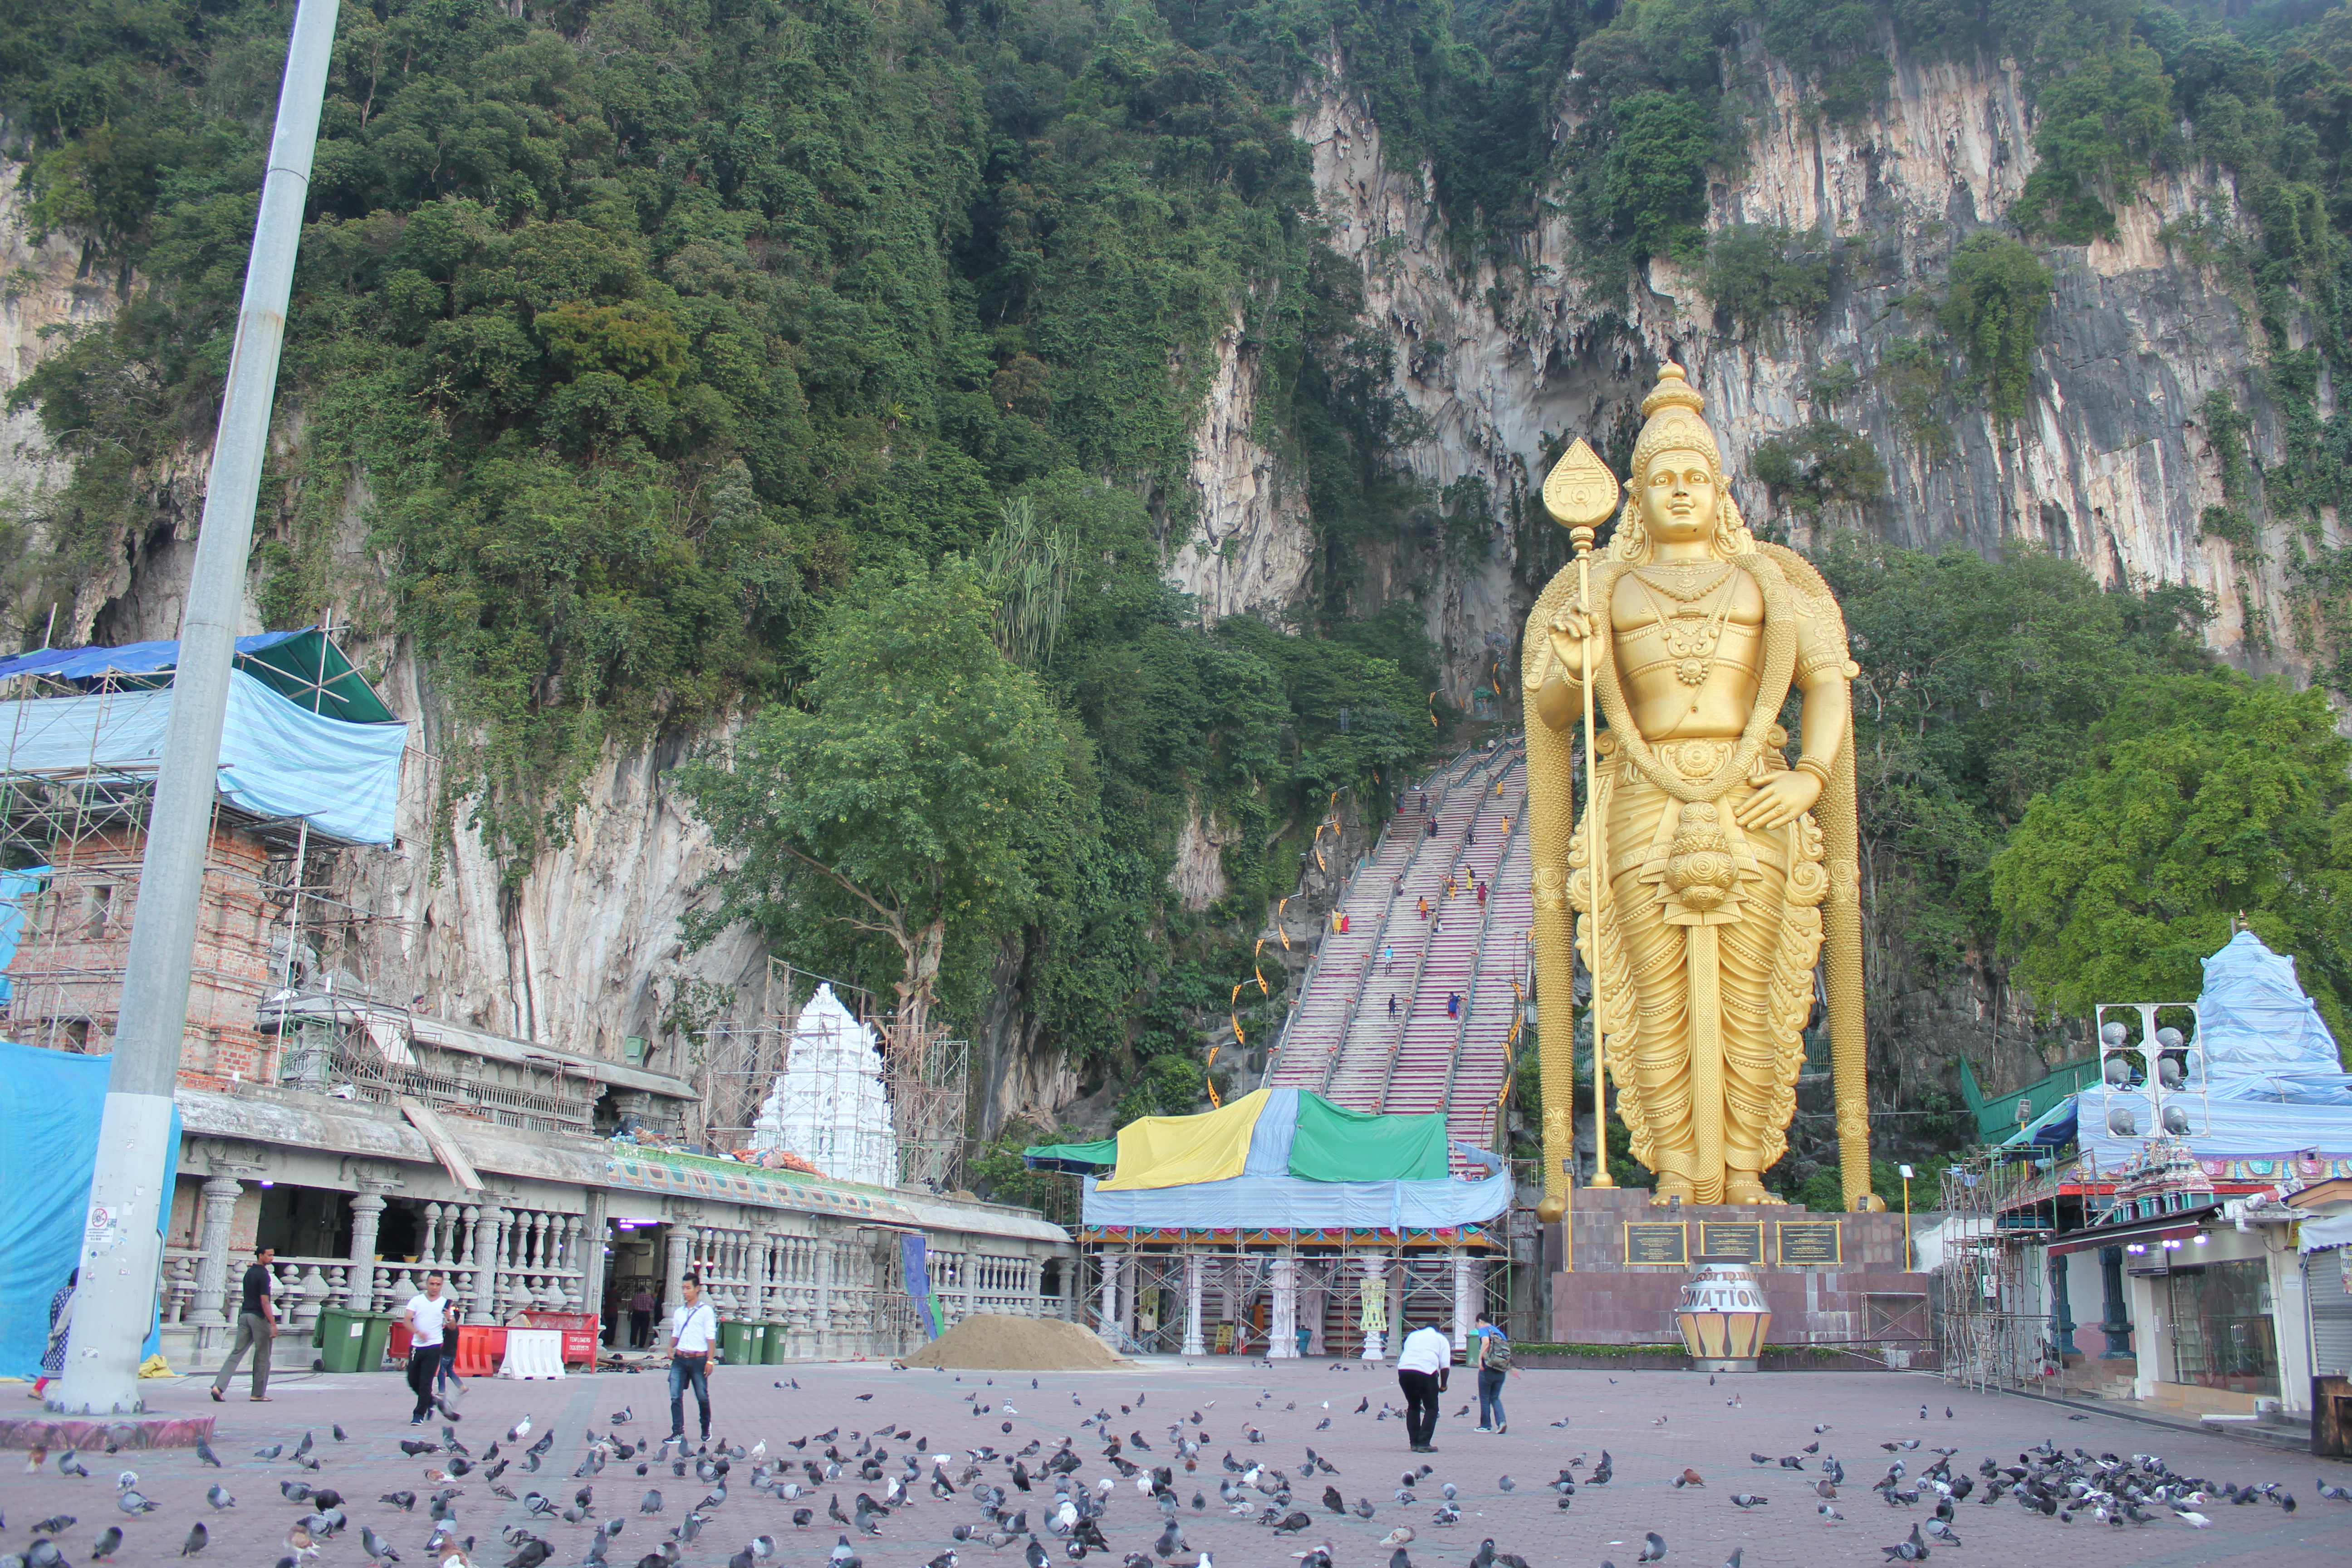 Batu Caves early in the morning.